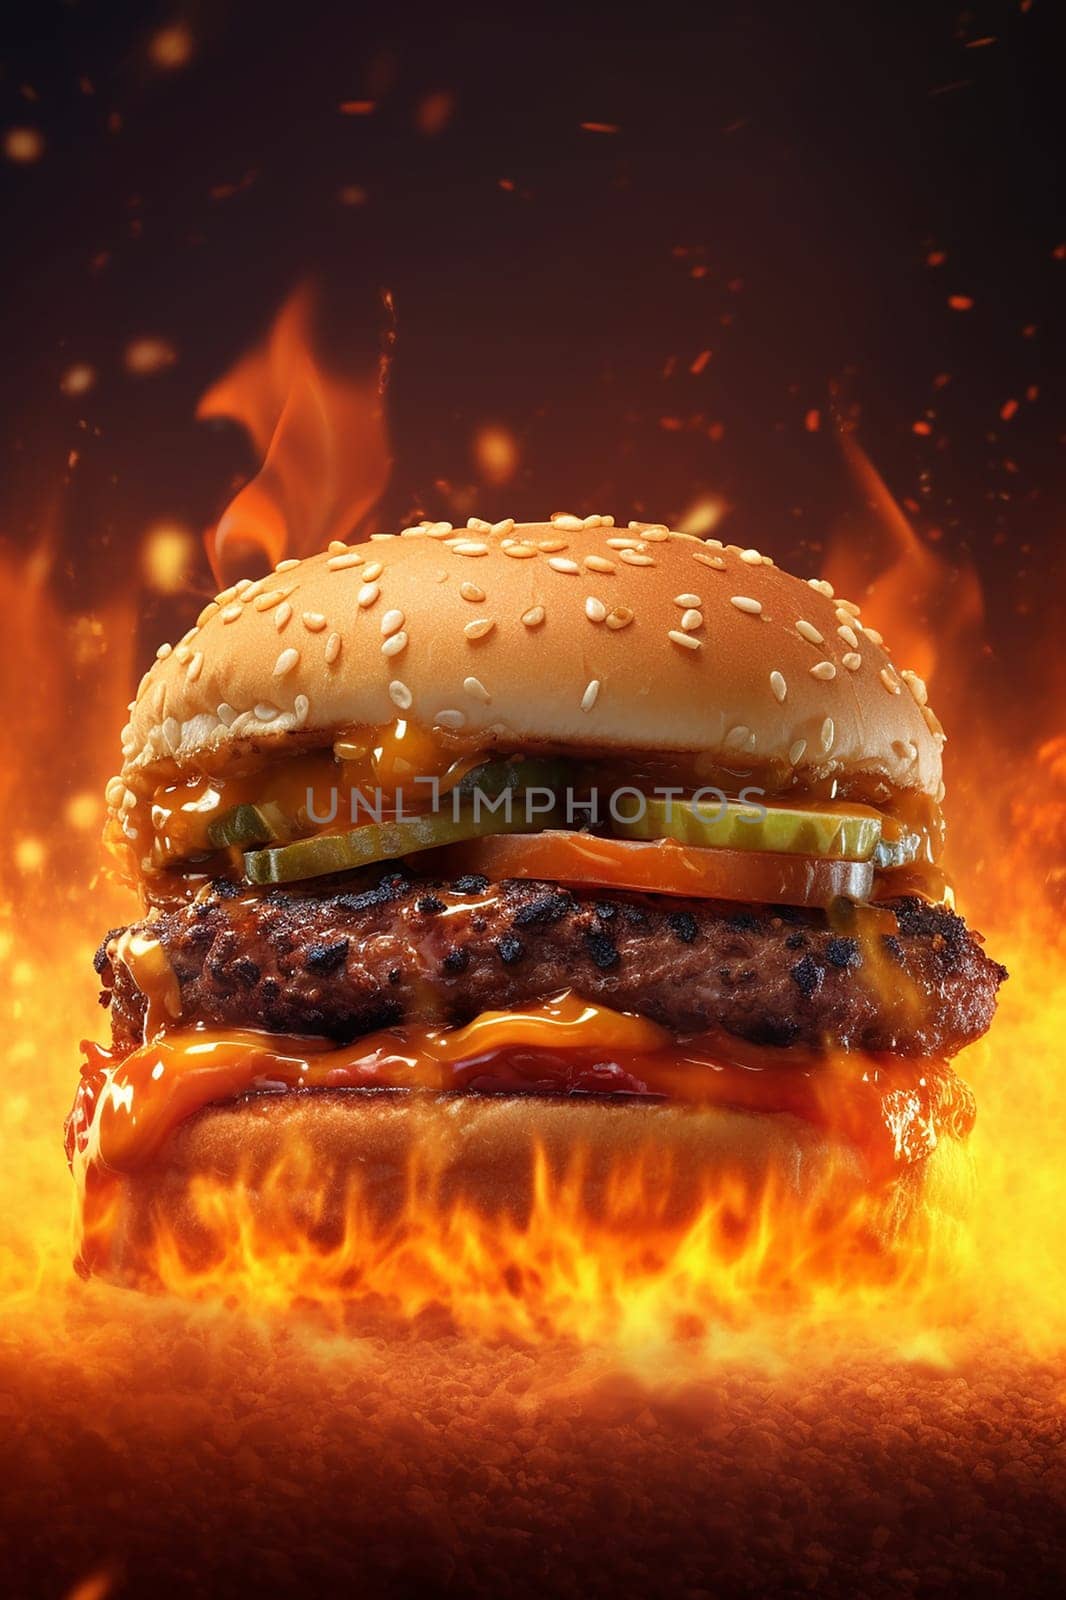 Juicy cheeseburger with flames in the background.